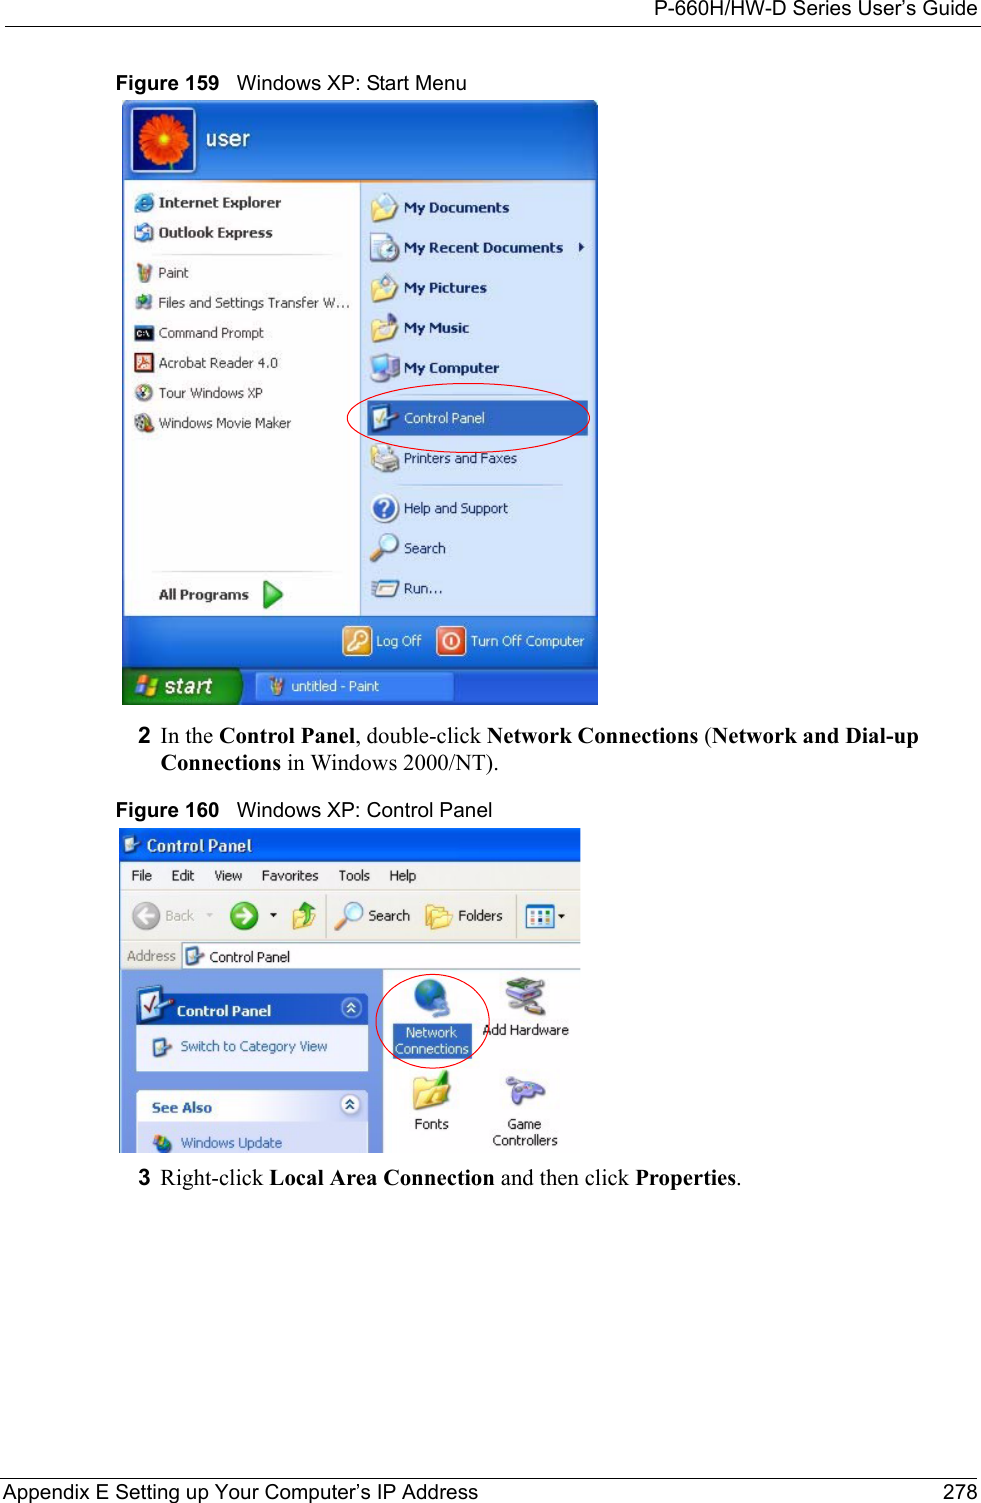 P-660H/HW-D Series User’s GuideAppendix E Setting up Your Computer’s IP Address 278Figure 159   Windows XP: Start Menu2In the Control Panel, double-click Network Connections (Network and Dial-up Connections in Windows 2000/NT).Figure 160   Windows XP: Control Panel3Right-click Local Area Connection and then click Properties.